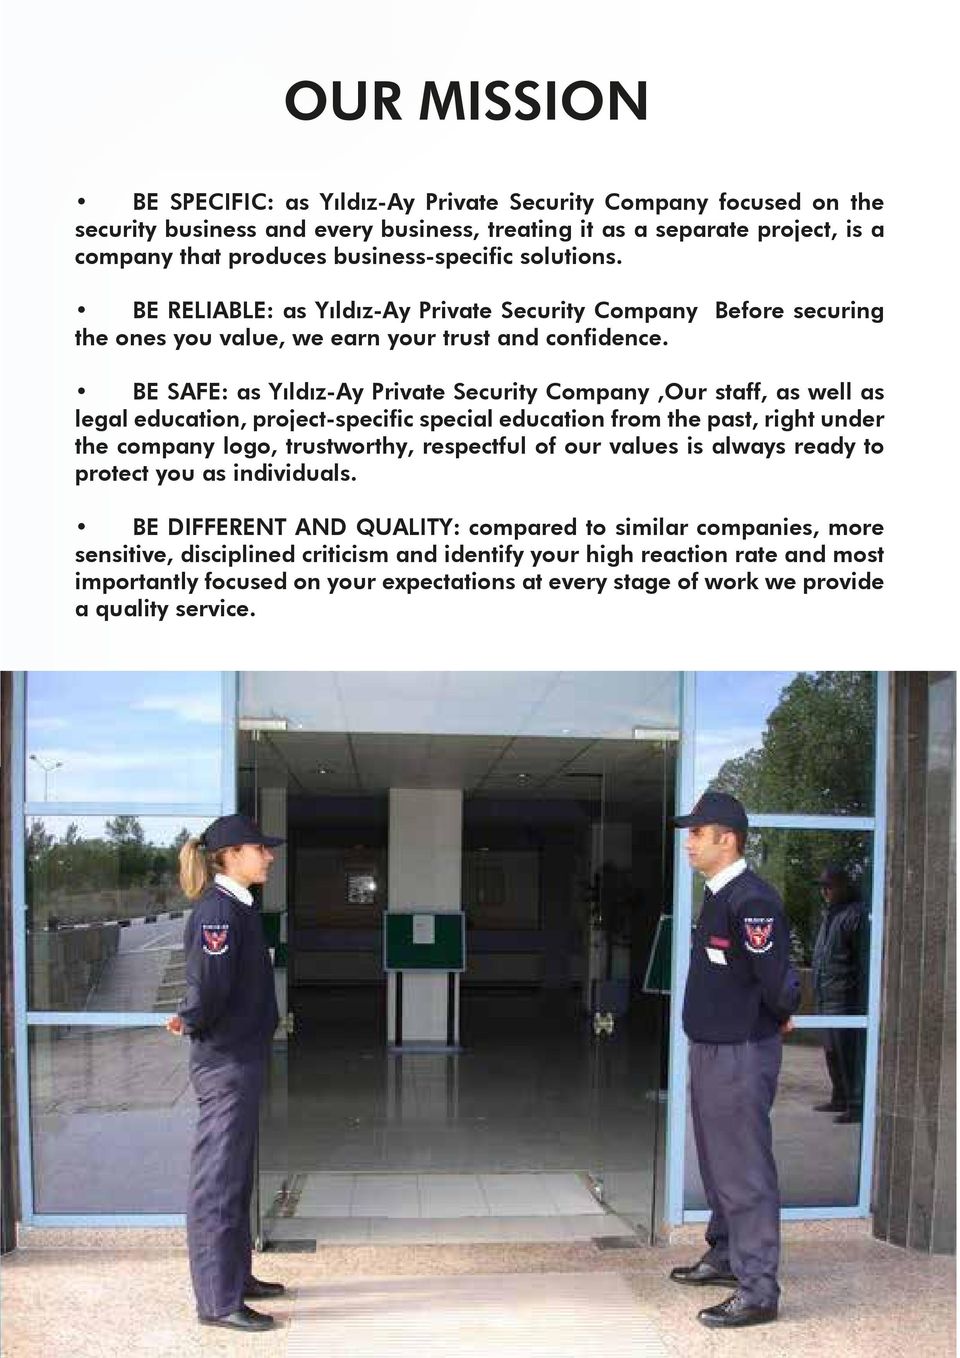 BE SAFE: as Yıldız-Ay Private Security Company,Our staff, as well as legal education, project-specific special education from the past, right under the company logo, trustworthy, respectful of our